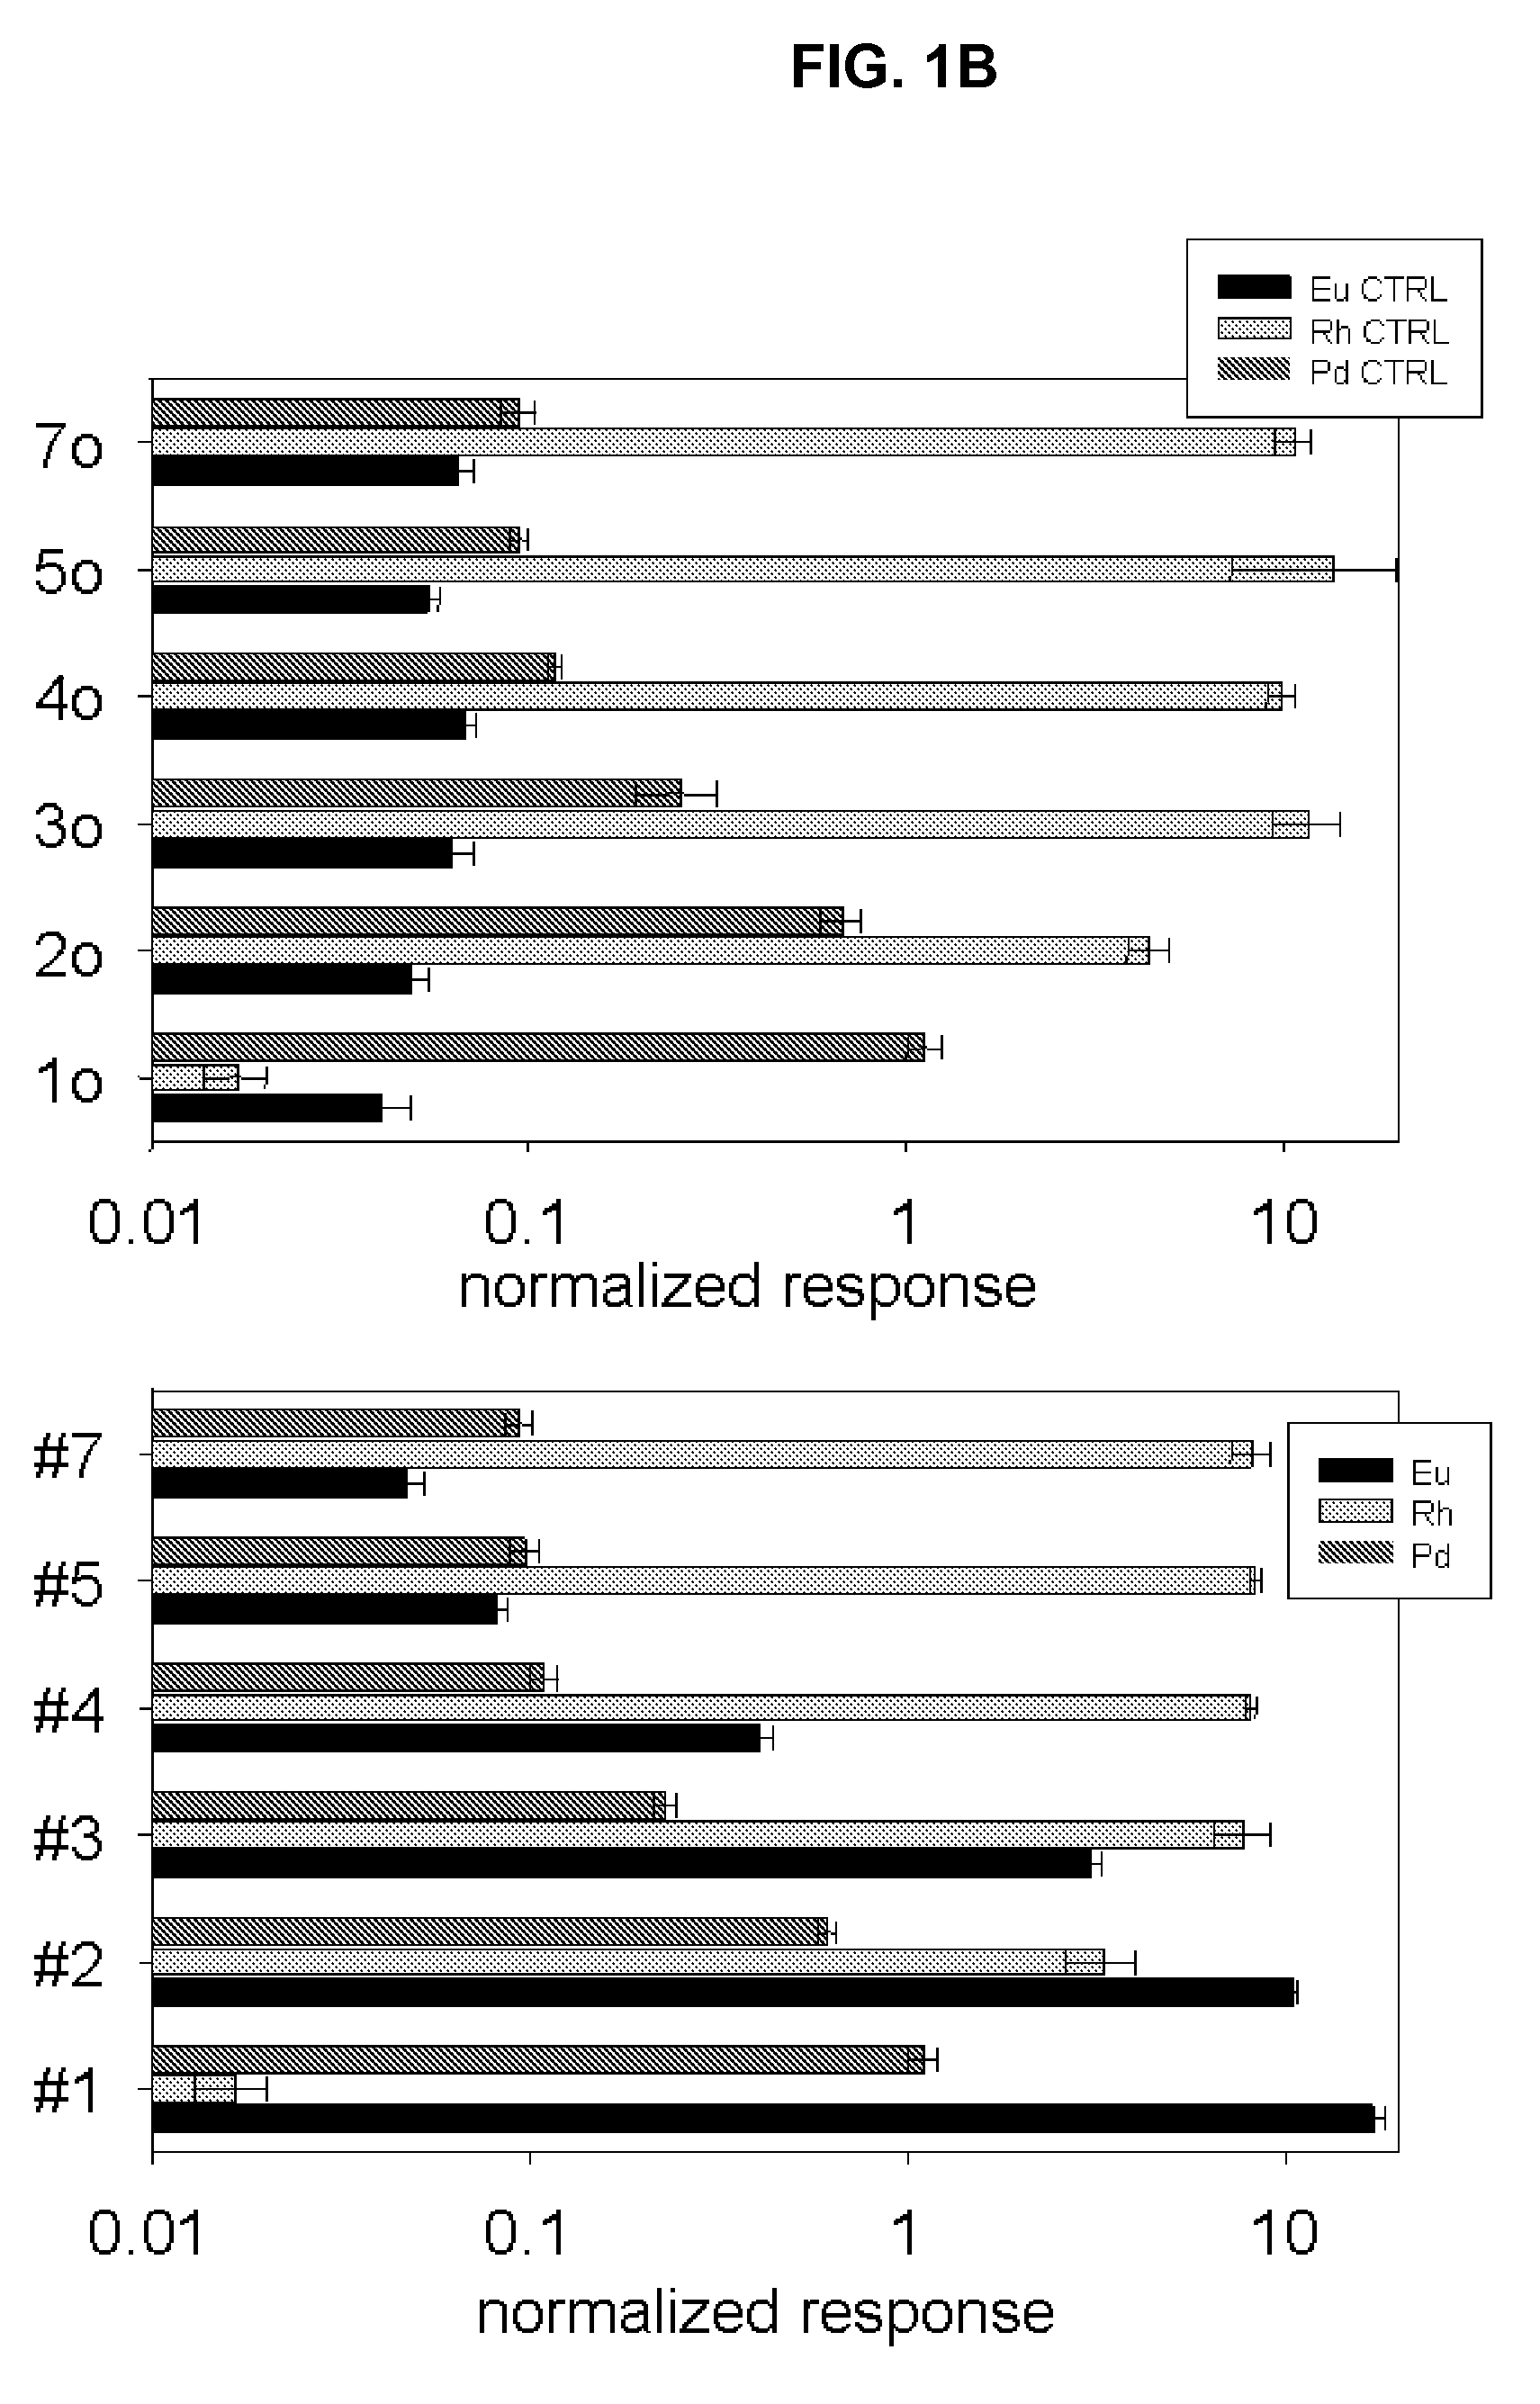 Quantitation of cellular DNA and cell numbers using element labeling